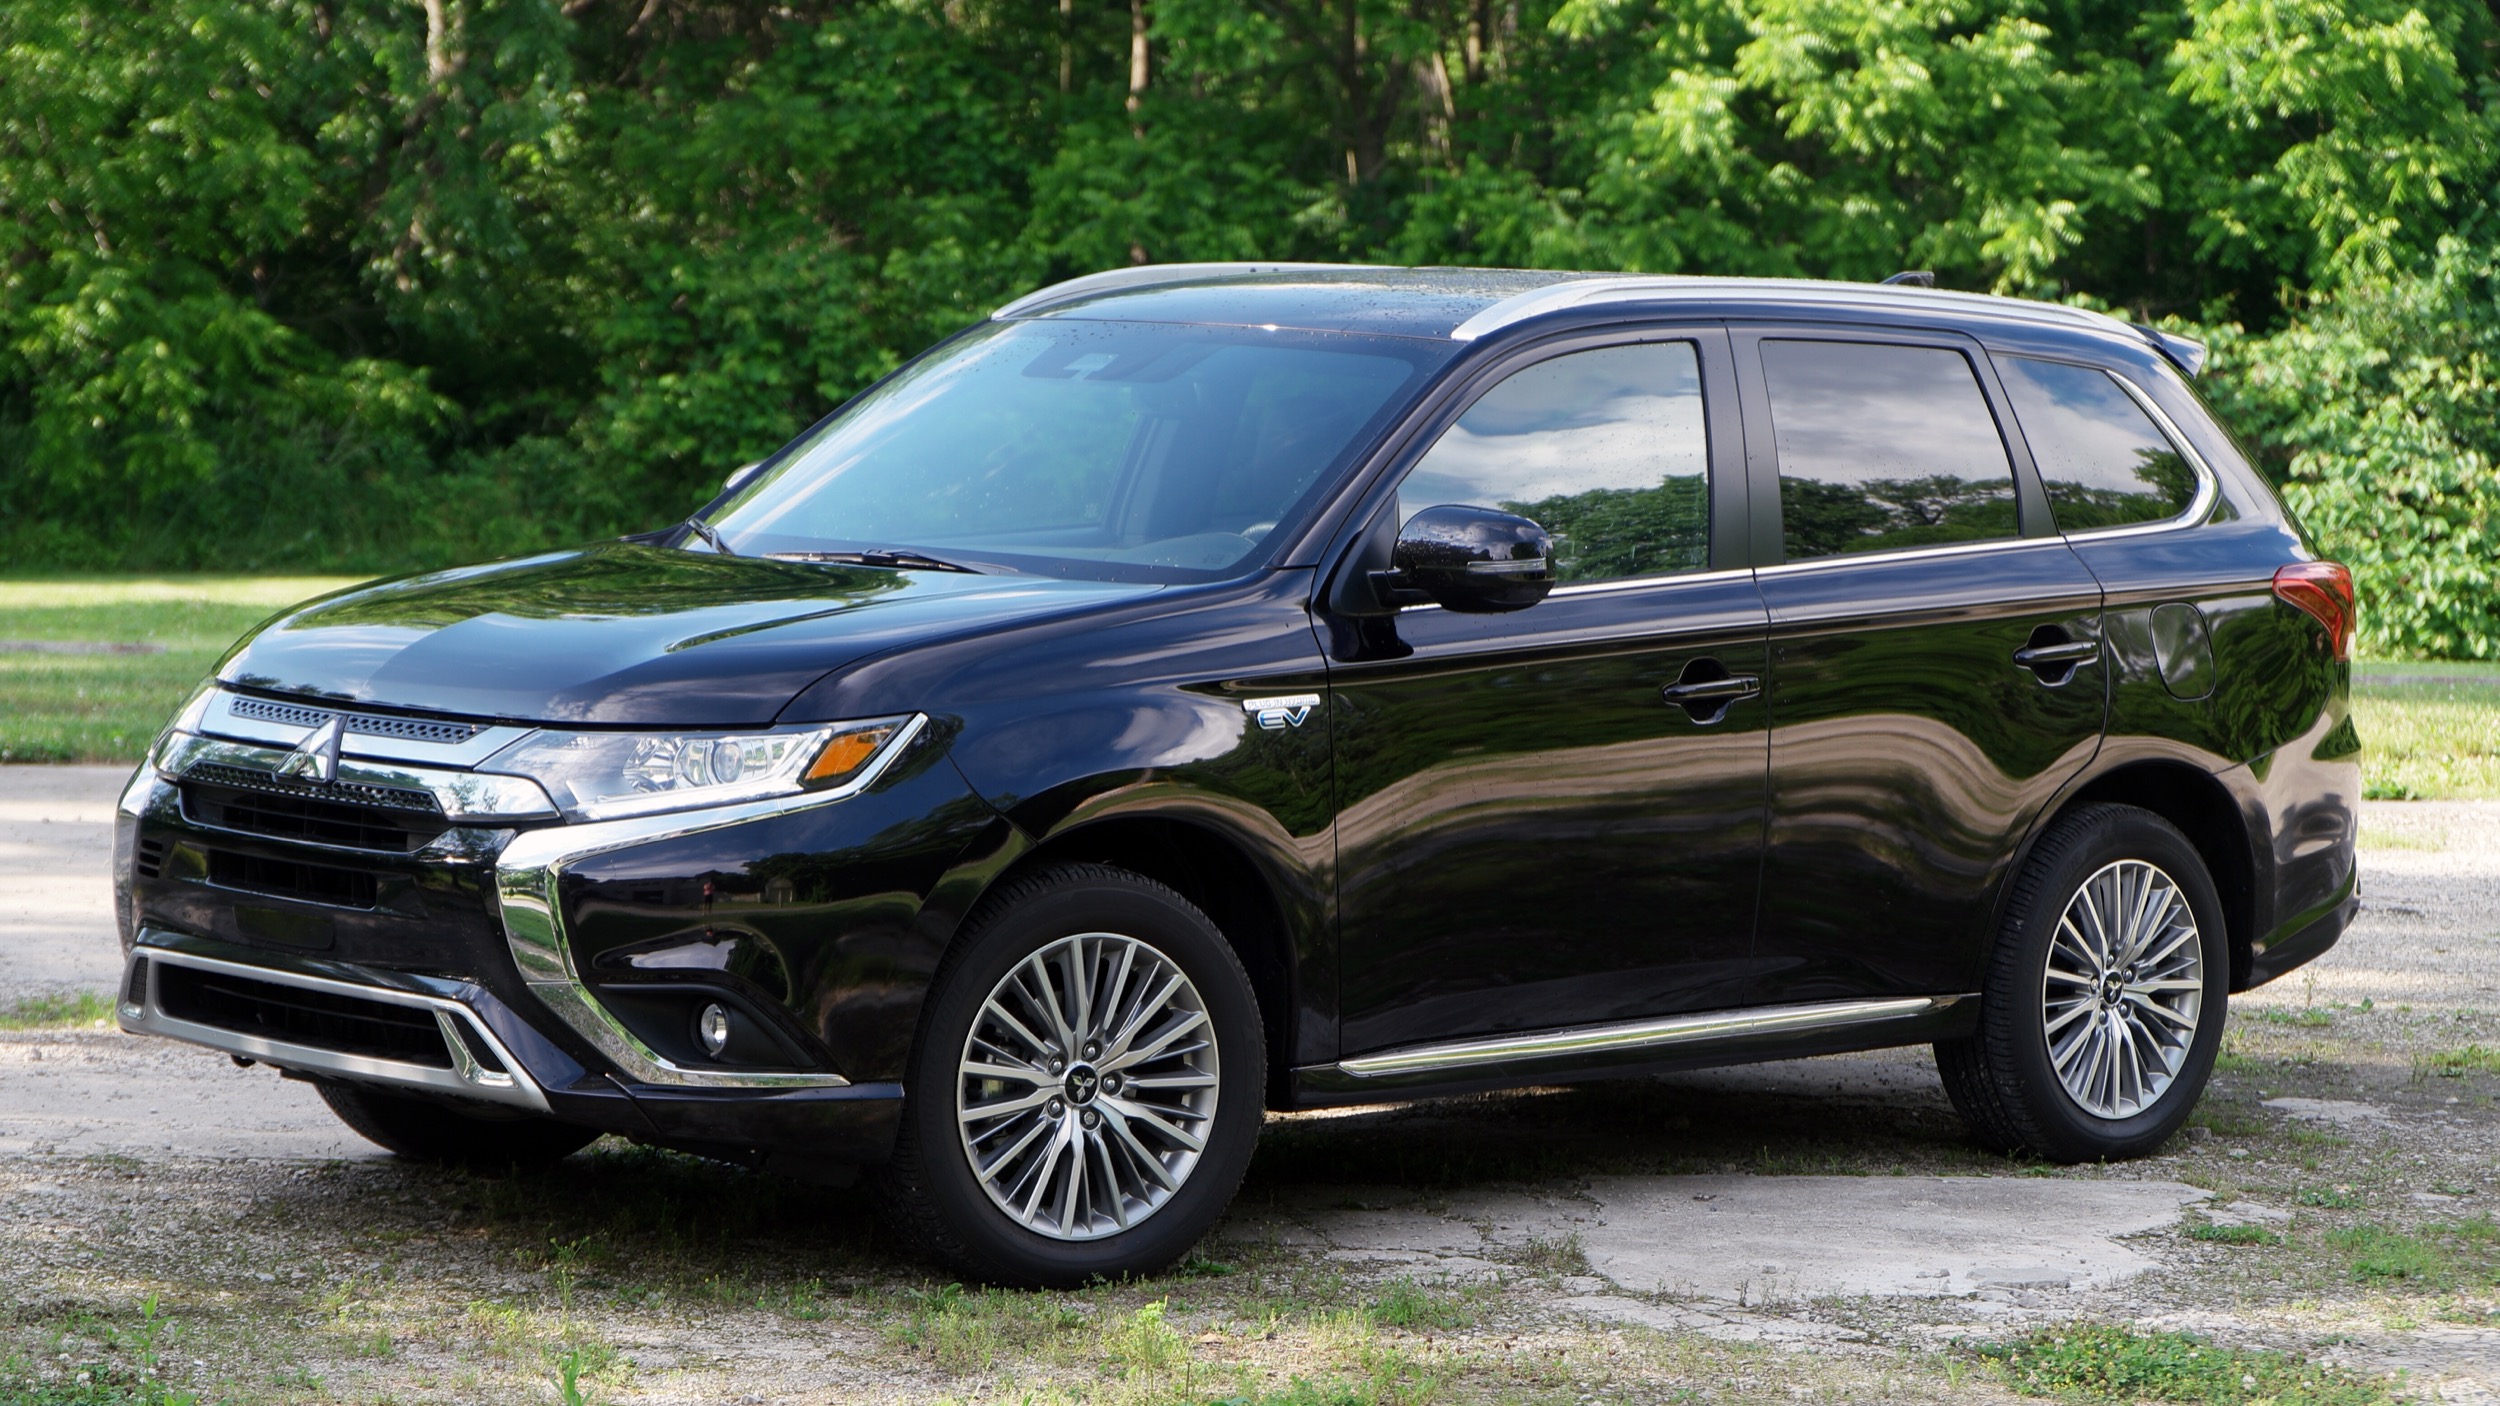 2021 Mitsubishi Outlander PHEV Road Test Review | Improved but falling